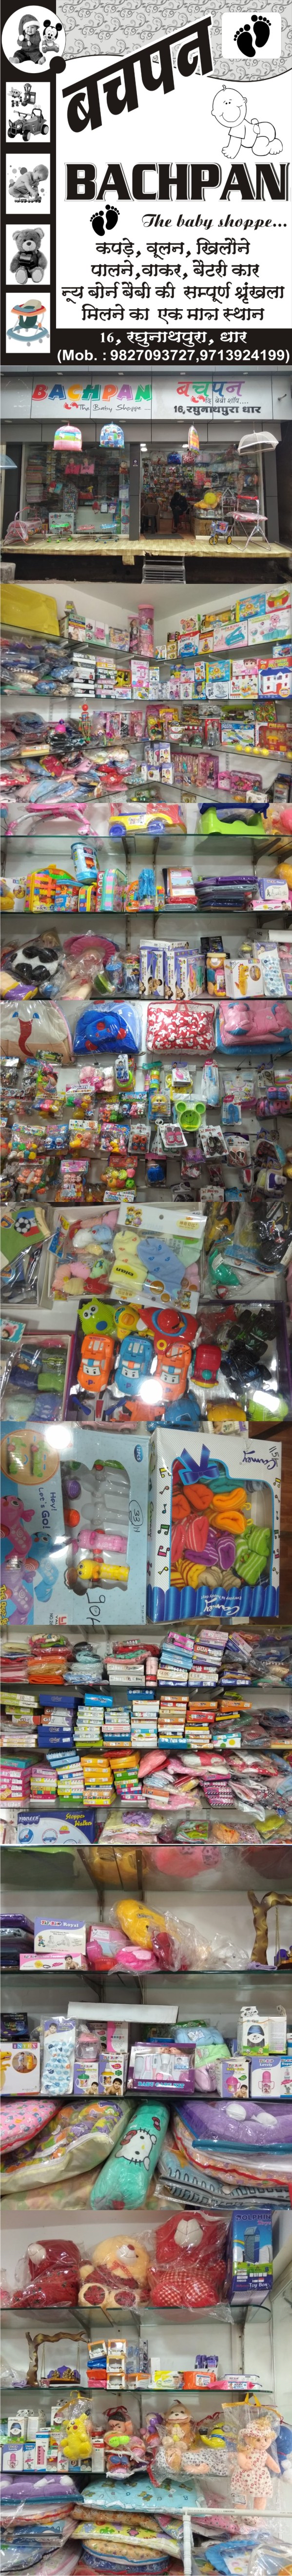 BACHPAN THE BABY SHOP